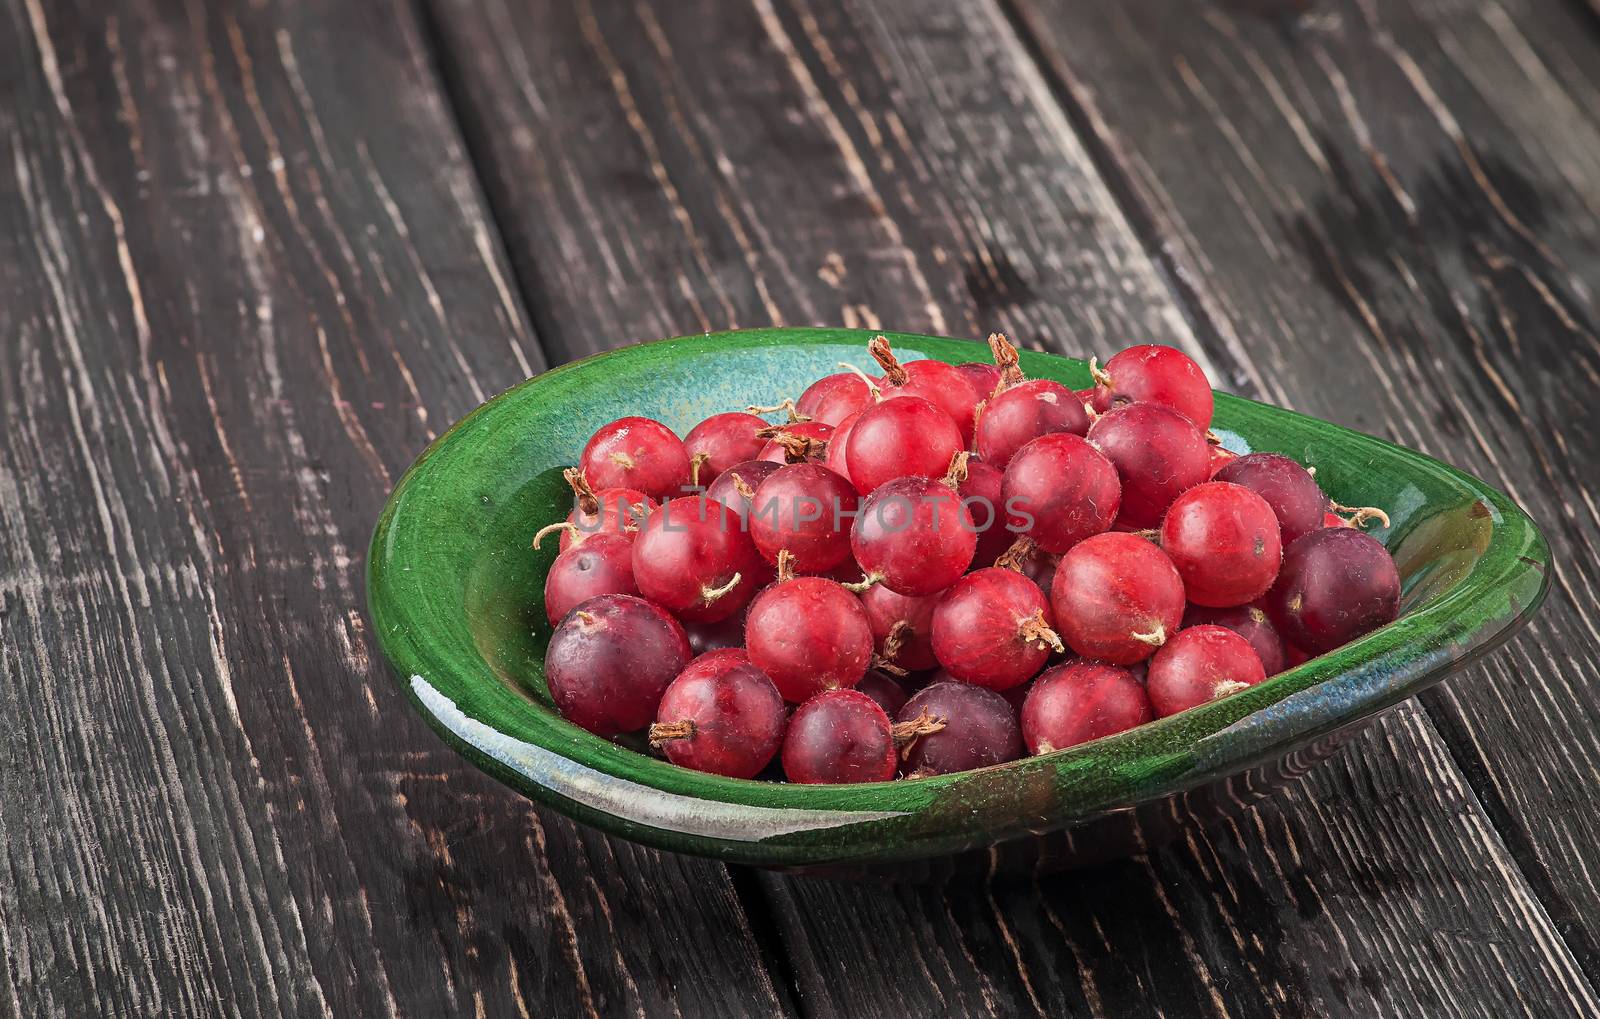 Red gooseberry in clay bowl. Wooden table. Blurred background.